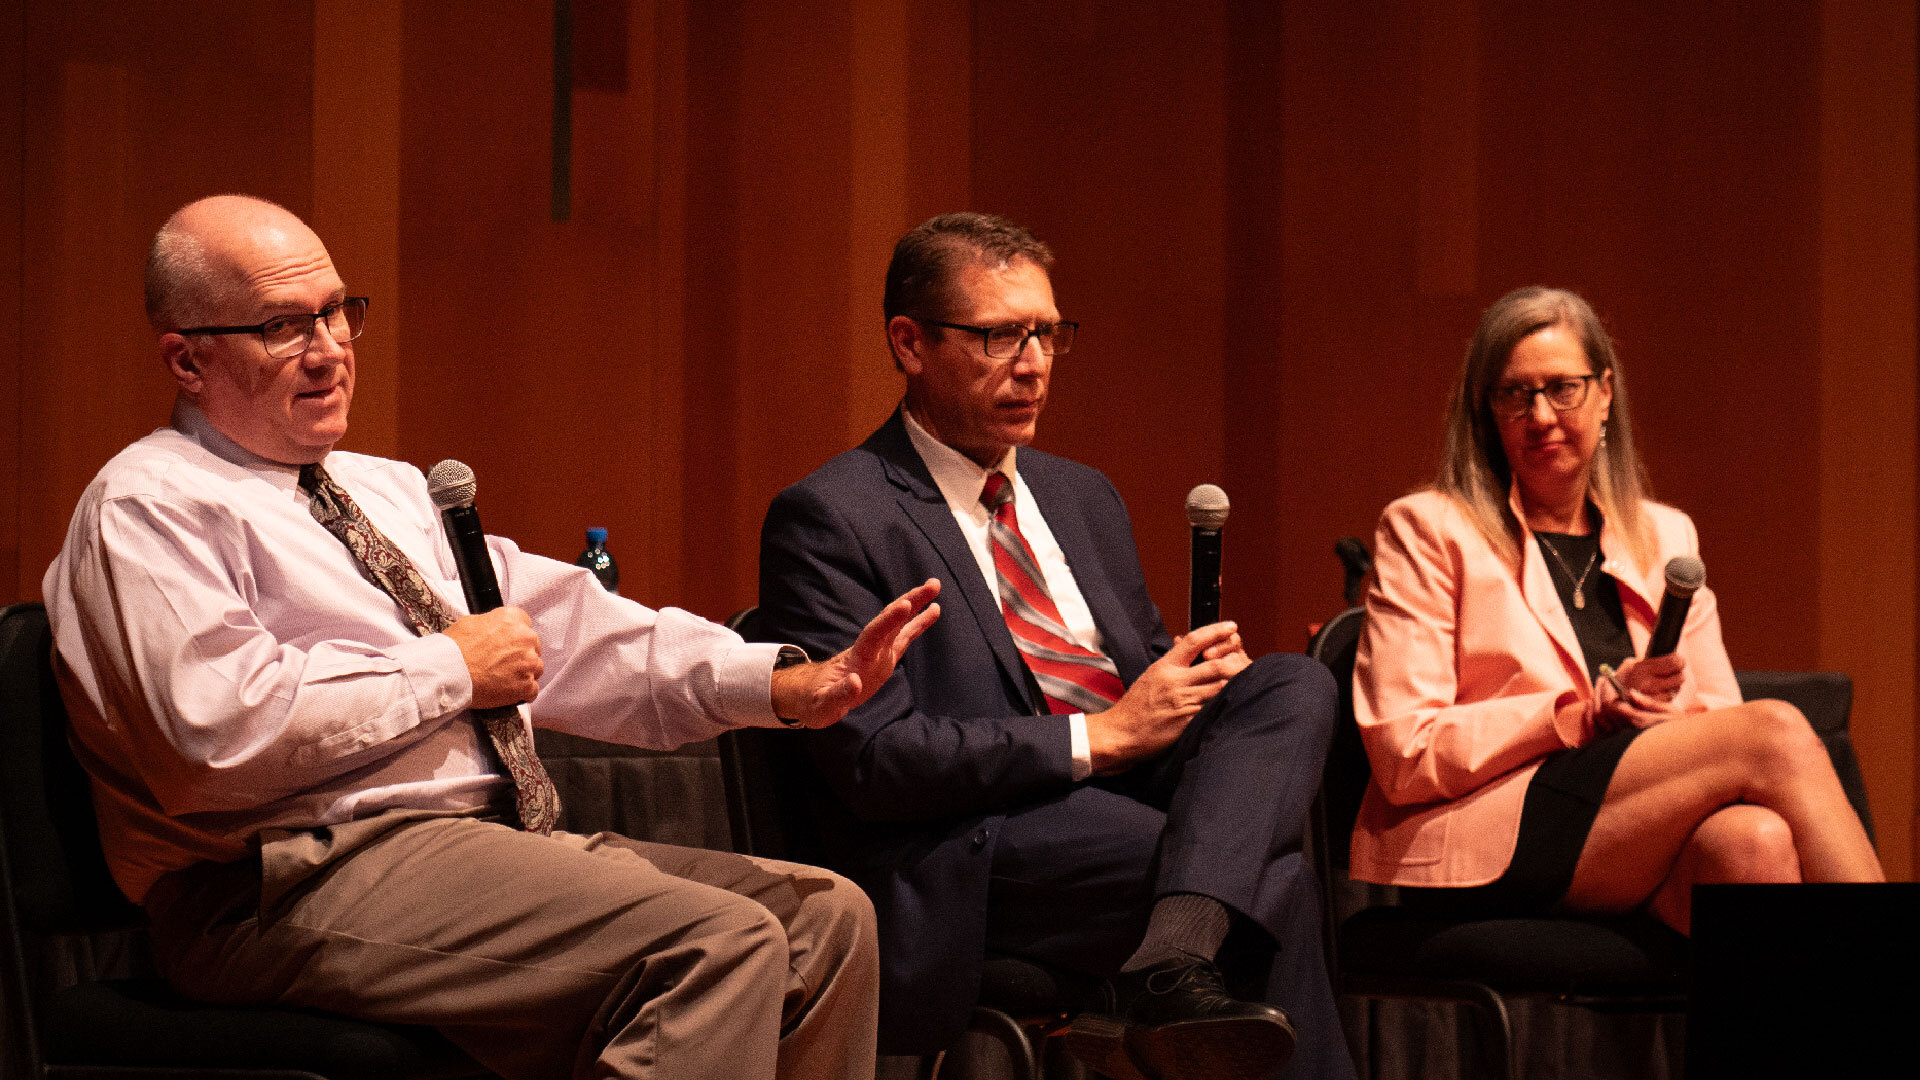 UCOA Judges Mortensen, Luthy, and Christiansen Forster participate in a Q&A at USU